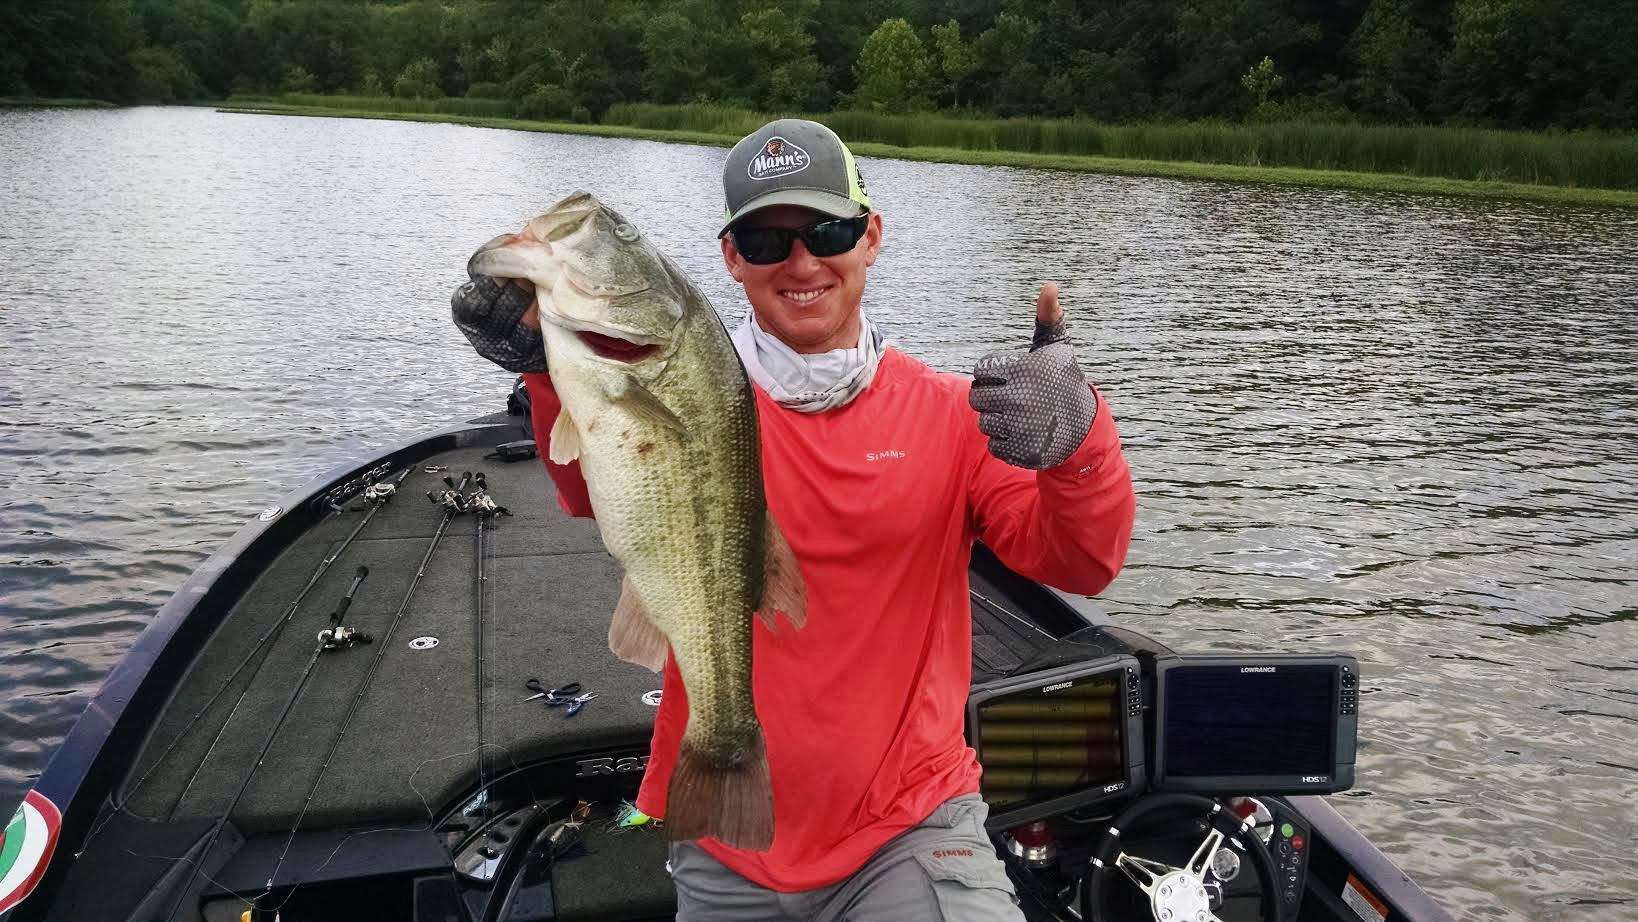 16th place: Micah Frazier (43-10) is sitting in the Classic standings at 31st for now. Heâs in at the moment but itâs not a comfortable spot. He canât afford to drop 15 or 20 places. Depending on the performance of others, a drop like that would force him to fish next week.